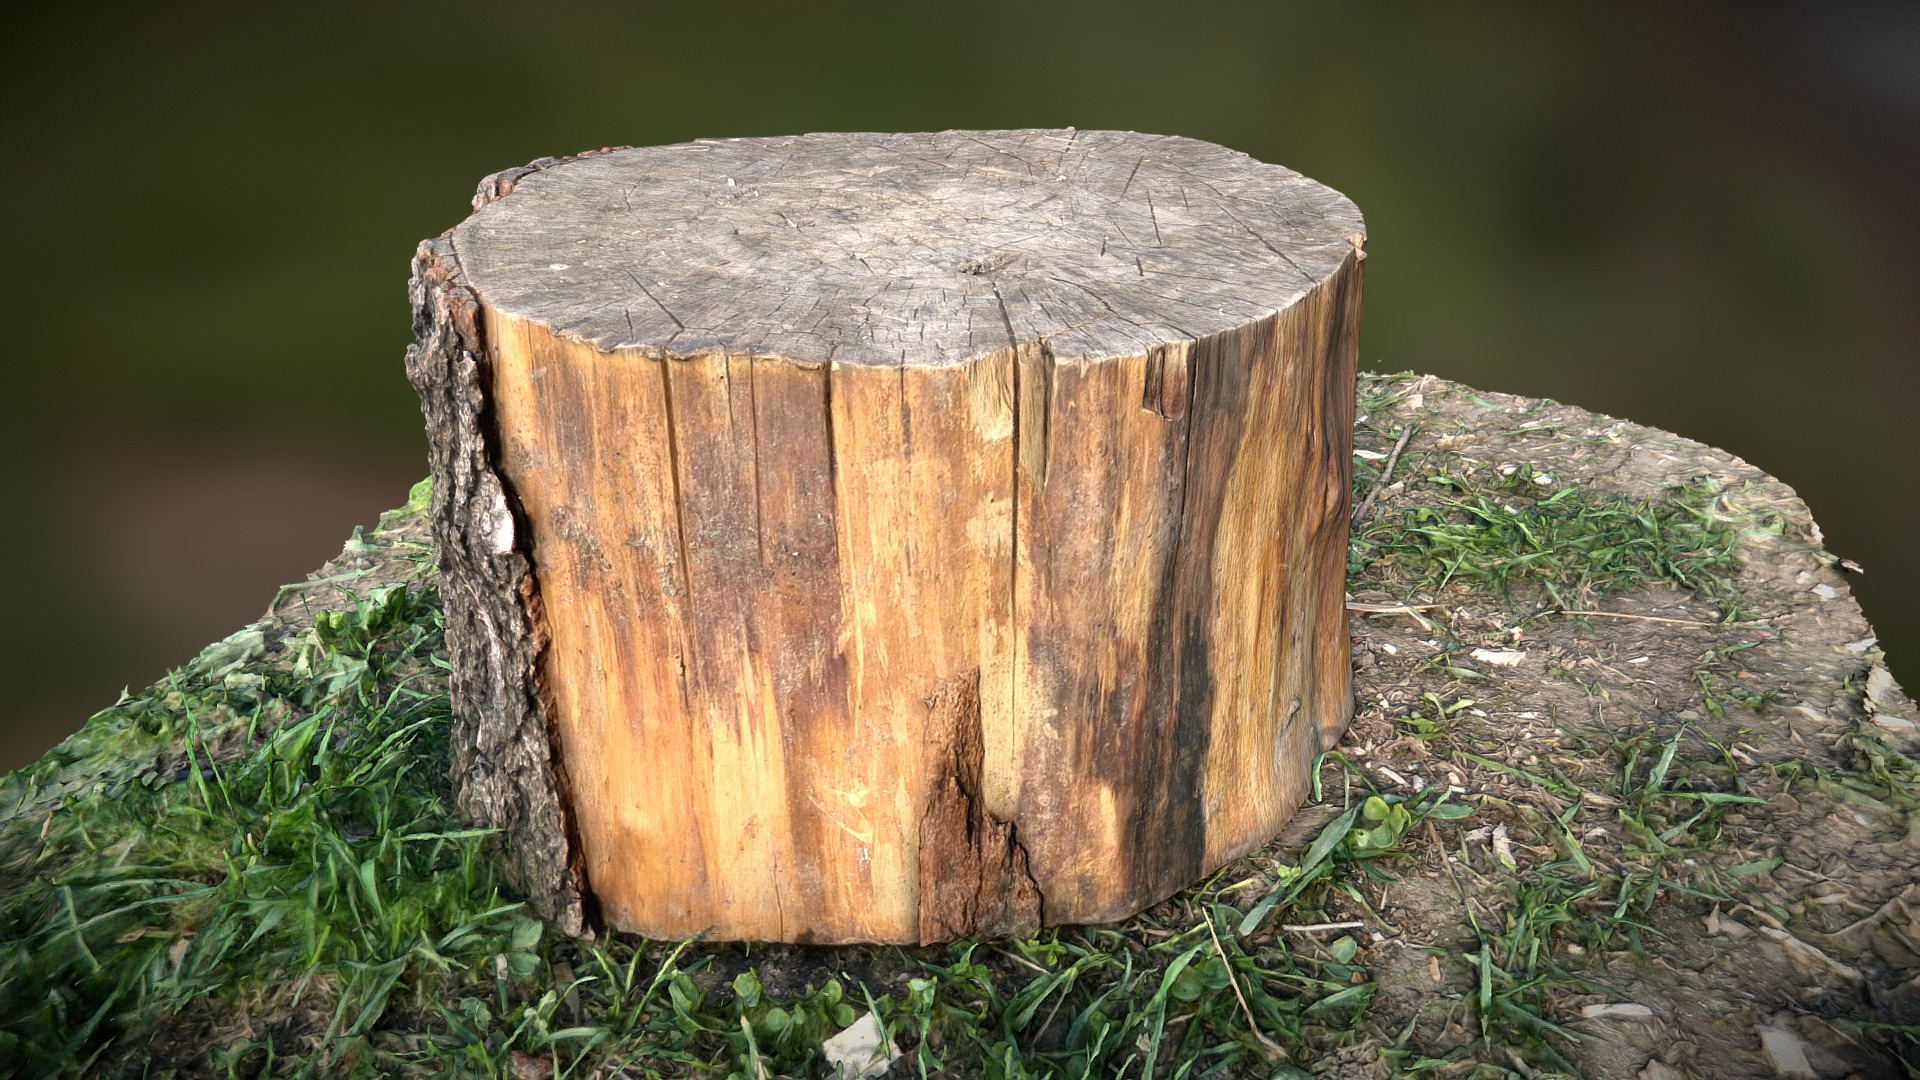 3D model Wood stump - This is a 3D model of the Wood stump. The 3D model is about a tree stump in the grass.